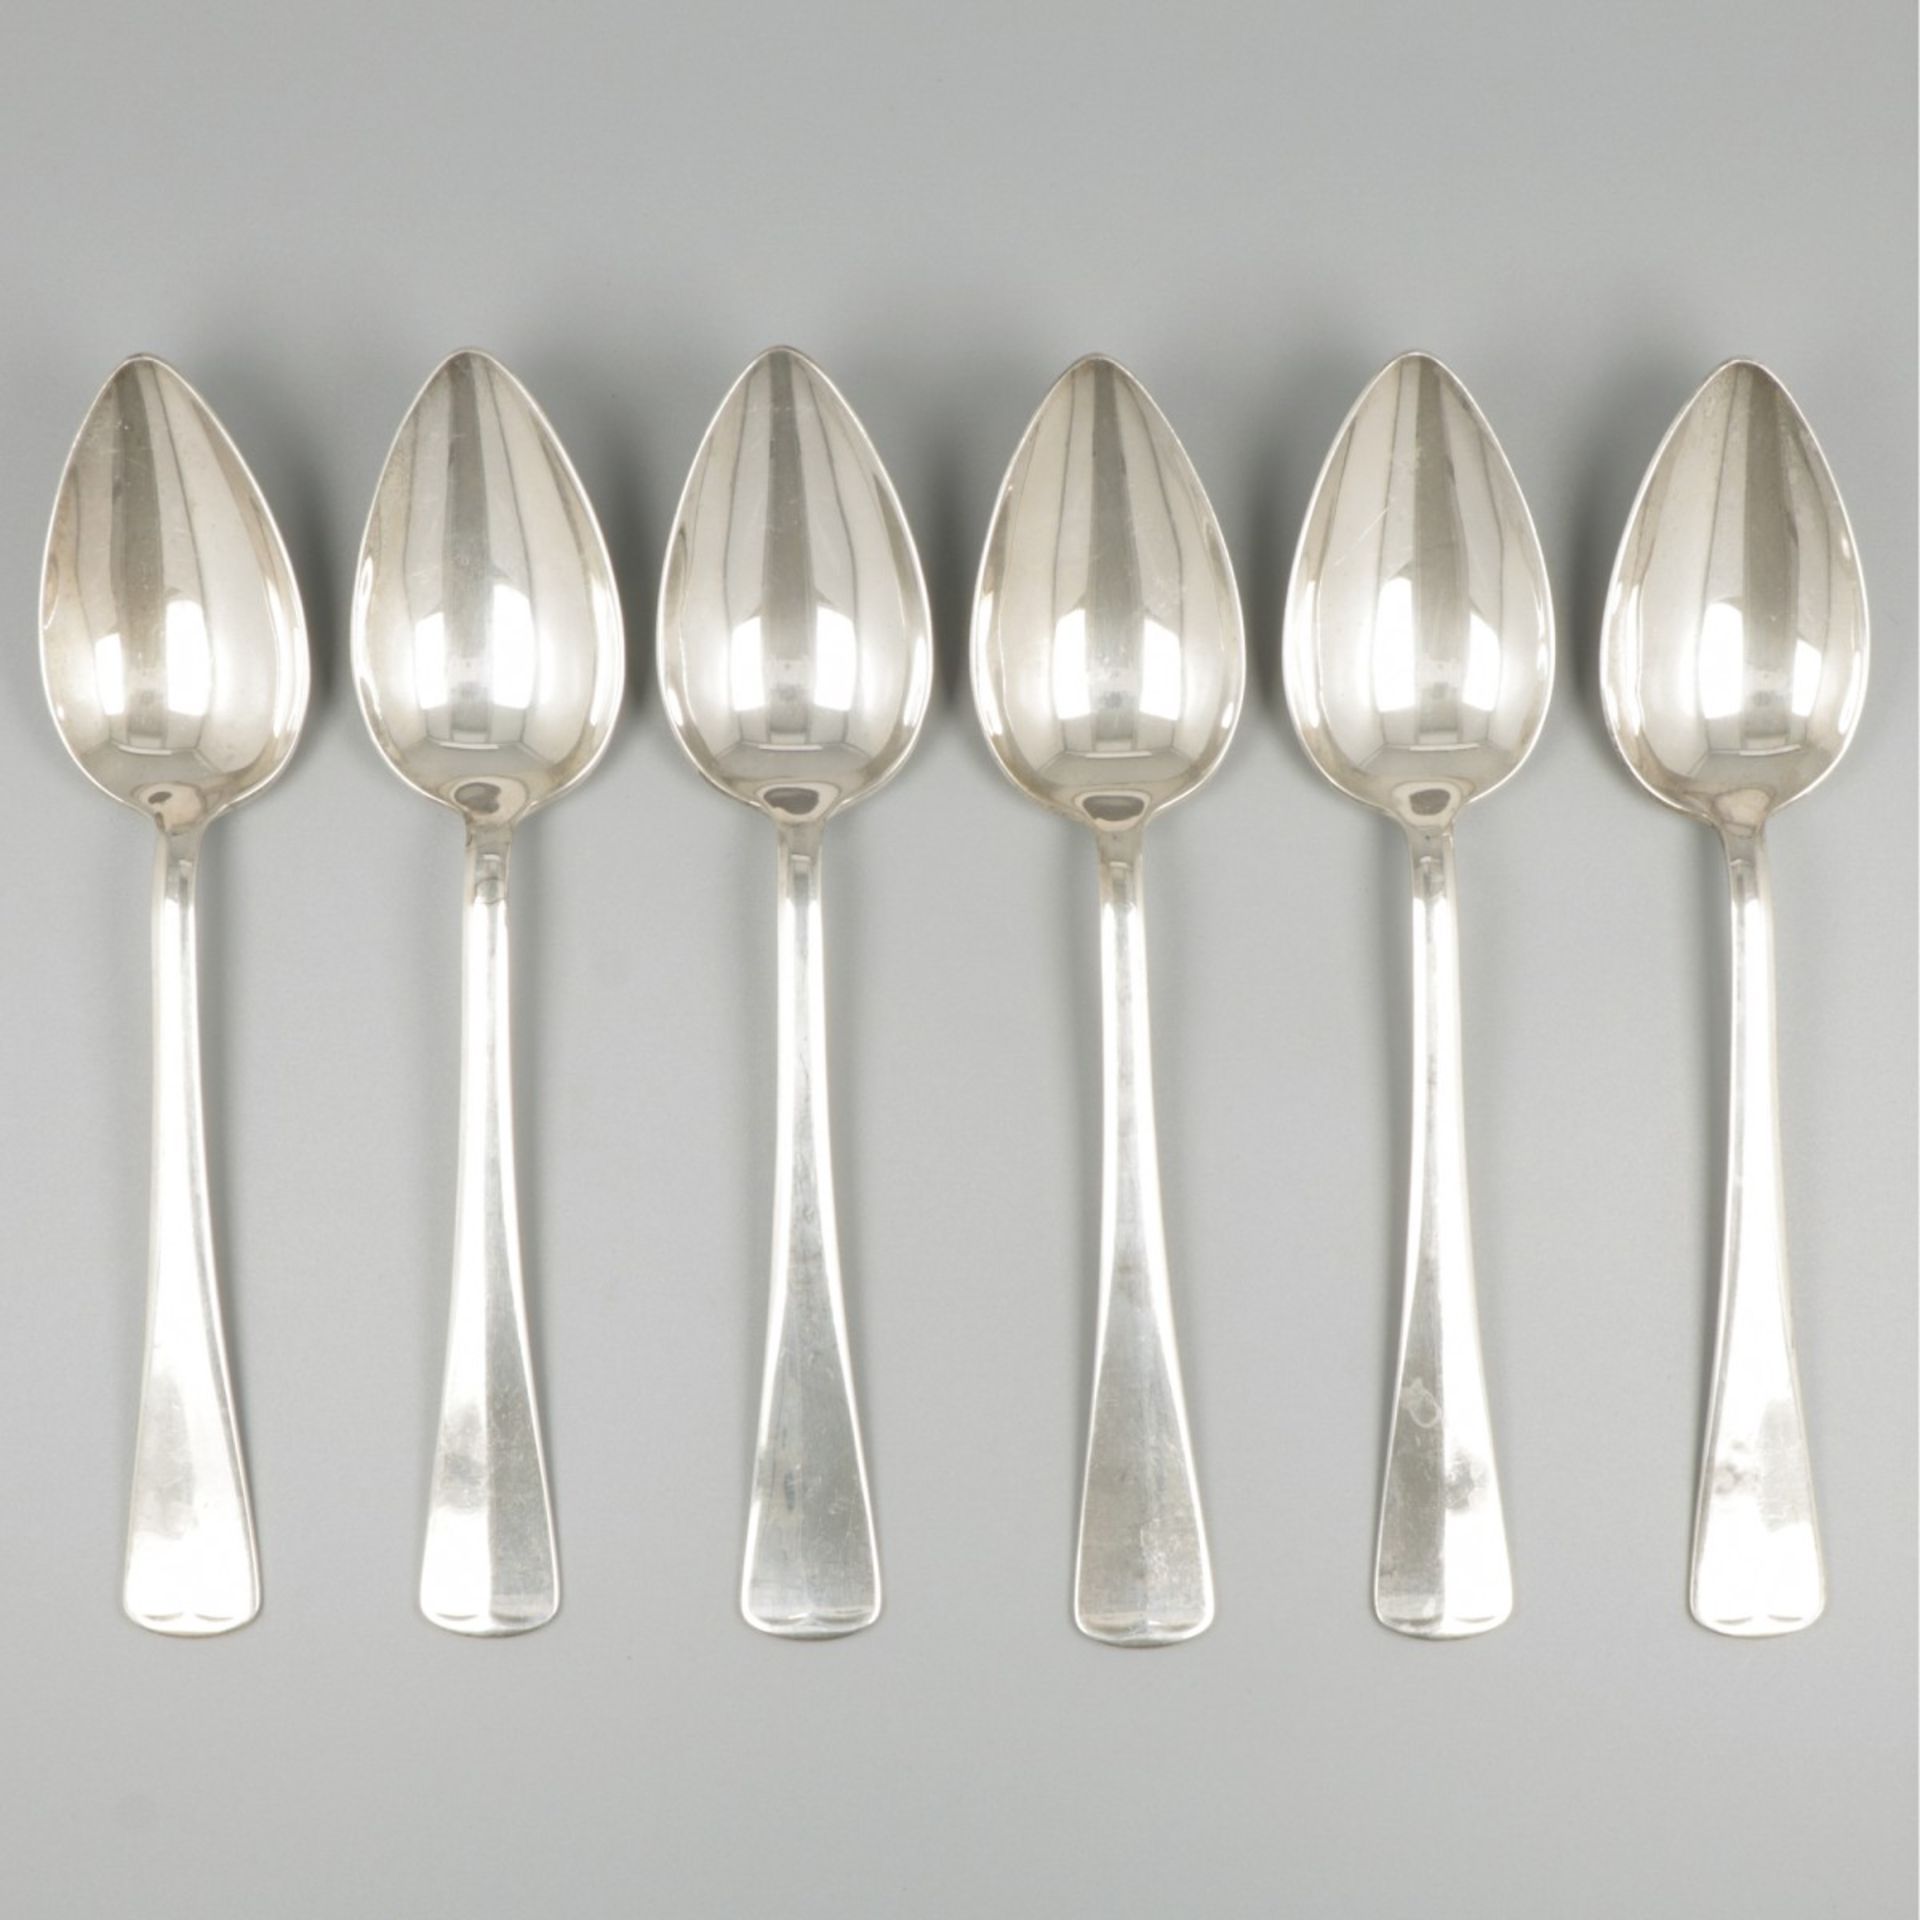 6-piece set dinner spoons ''Haags lofje'' silver.